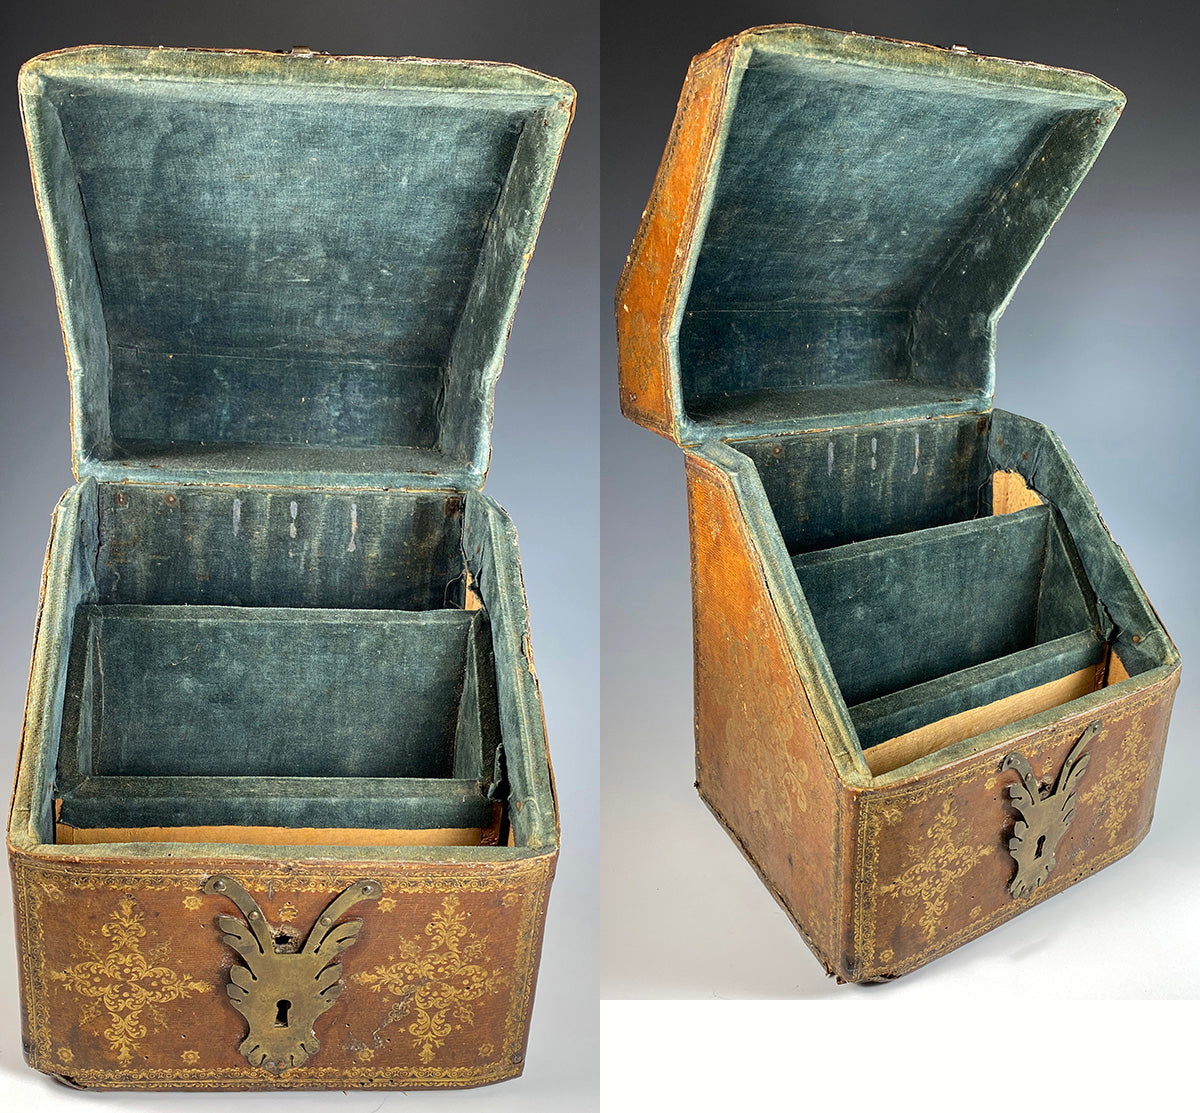 Antique 18th Century Gold Embossed Leather Writer's Cabinet, Box, Chest, Italian or French